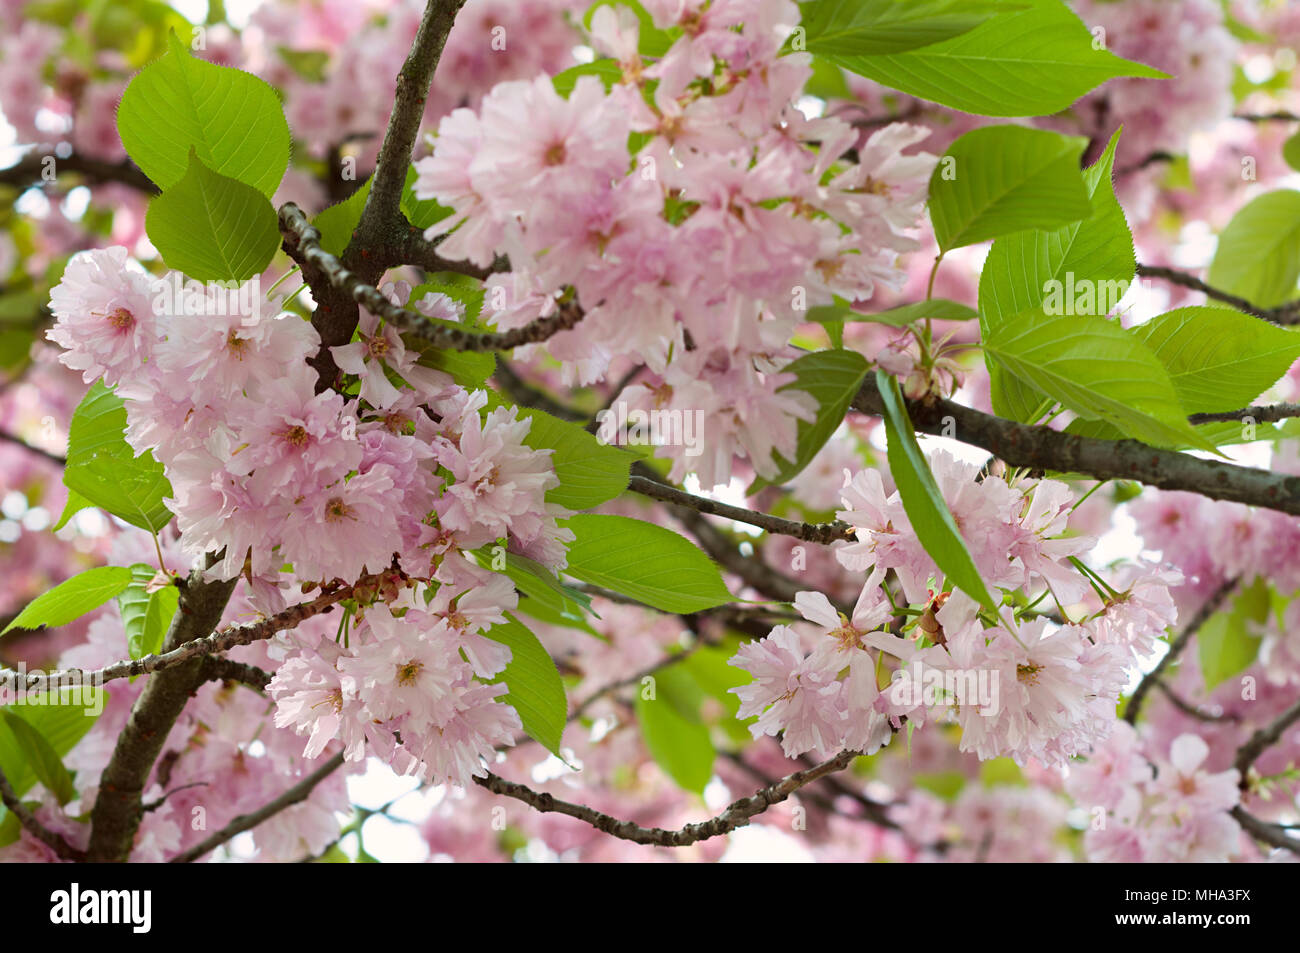 Cherry Blossom Photos, Download The BEST Free Cherry Blossom Stock